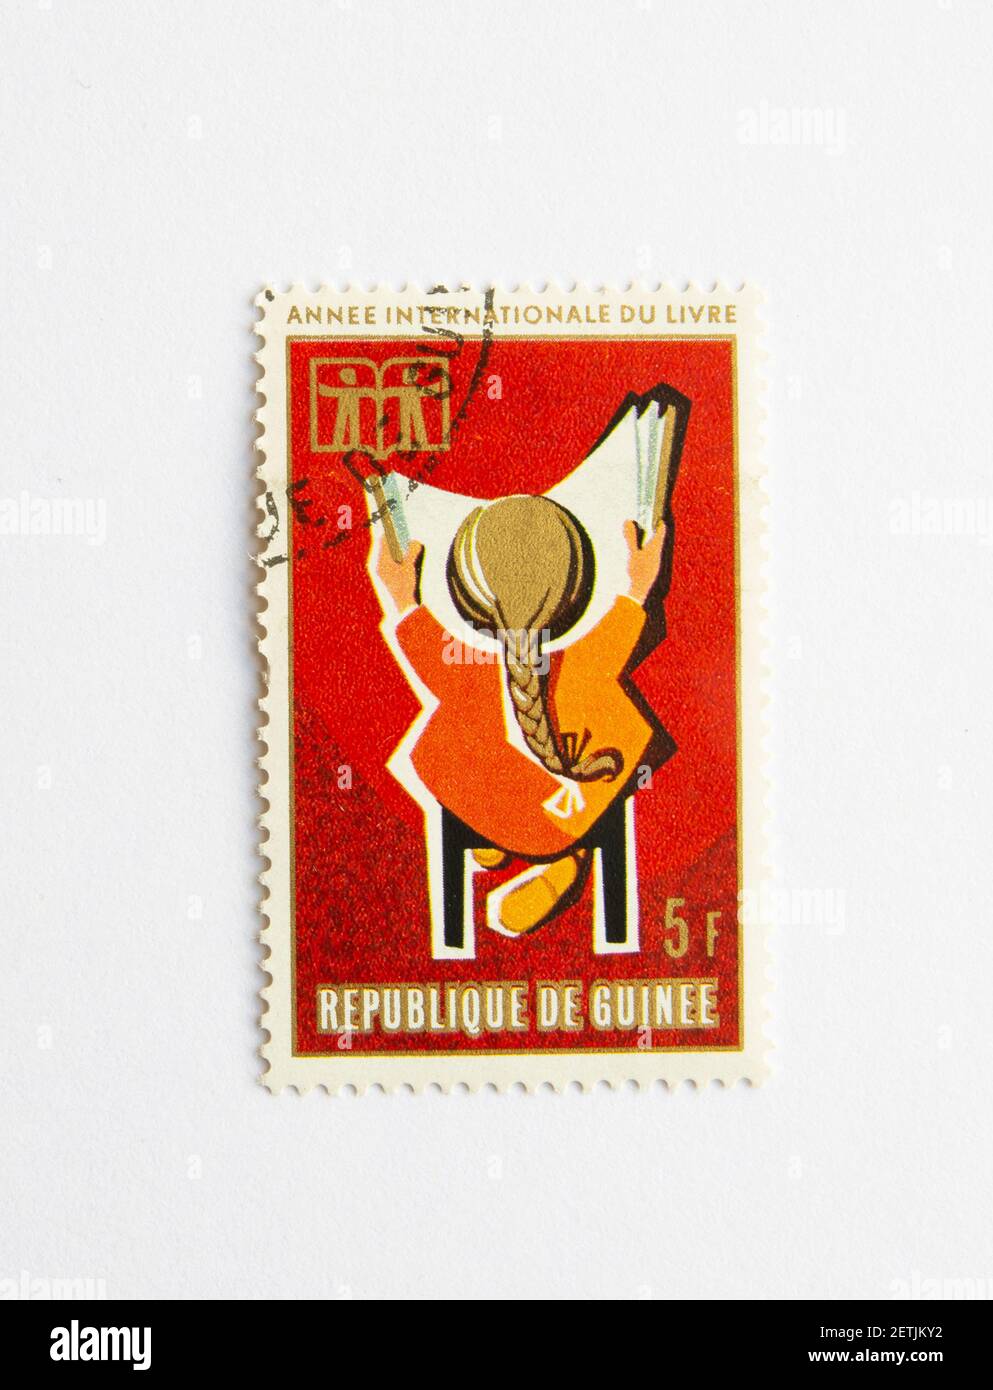 01.03.2021 Istanbul Turkey. Guinea Republic Postage Stamp. circa 1972. international year of the book. key of the future. Stock Photo